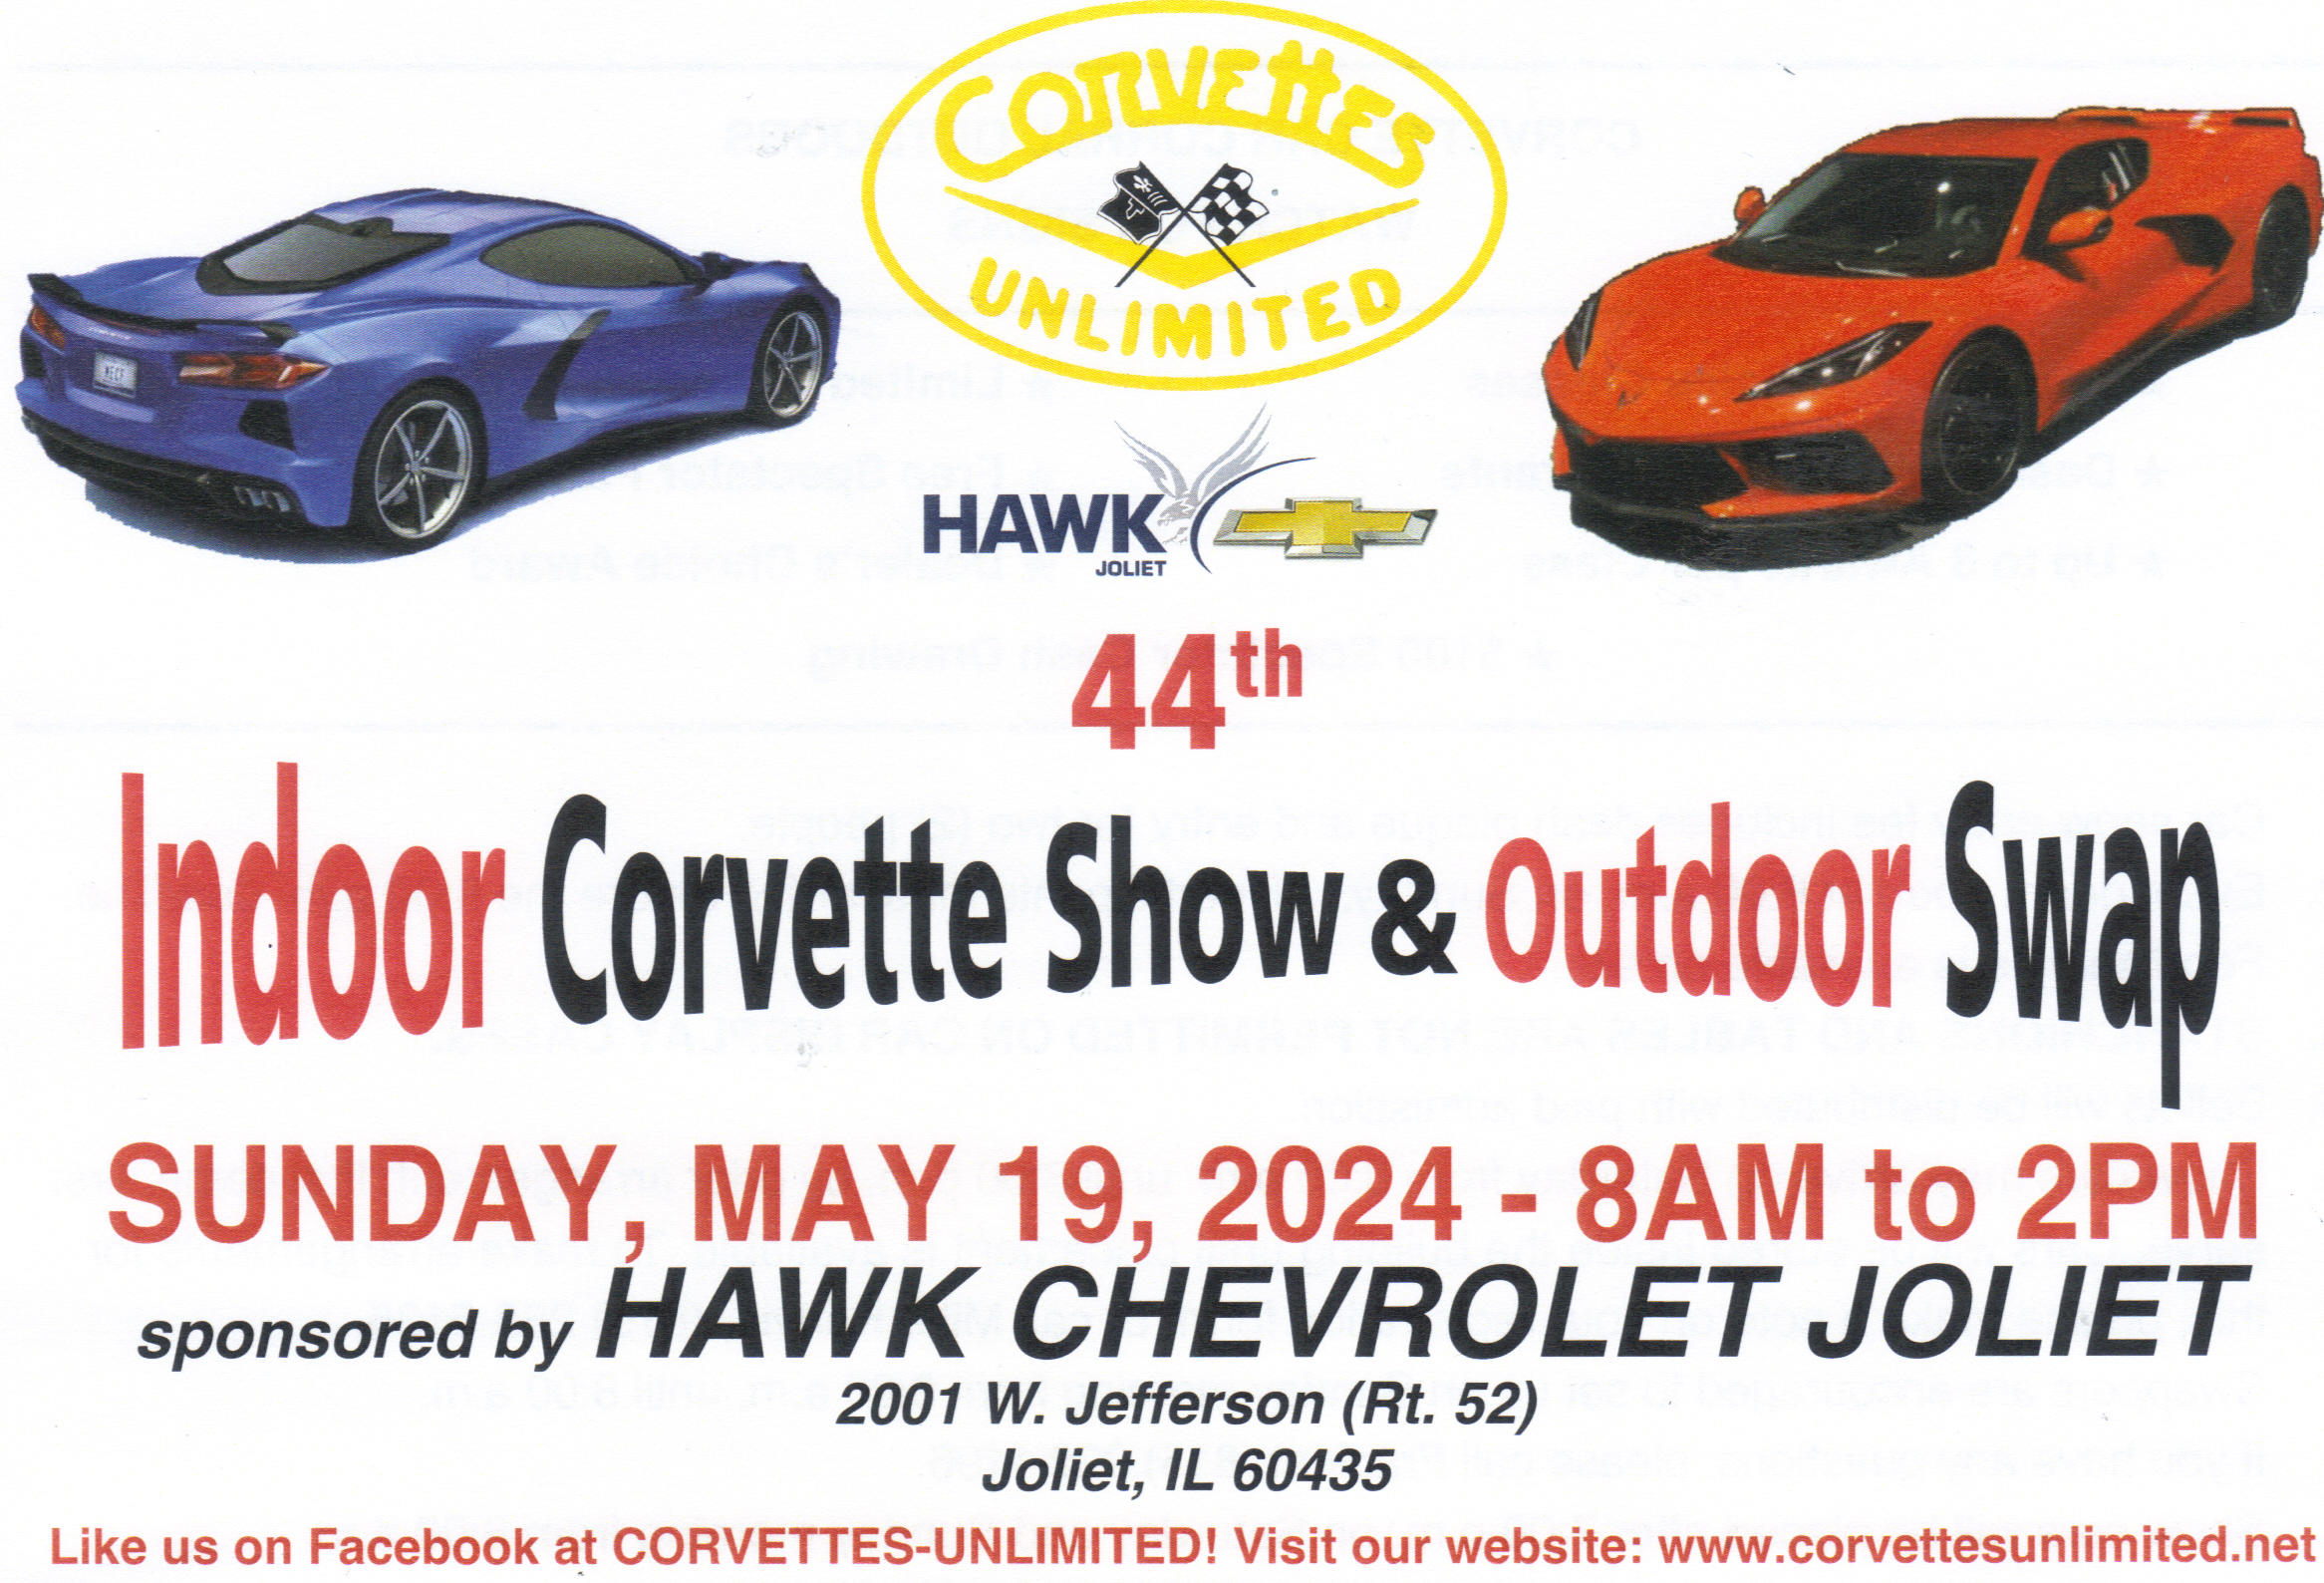 Join us for our 44th annual Car Show on Sunday, May 19th, 2024 being hosted by the great people of Hawk Auto Chevrolet Cadillac - Joliet hawkchevyjoliet.com